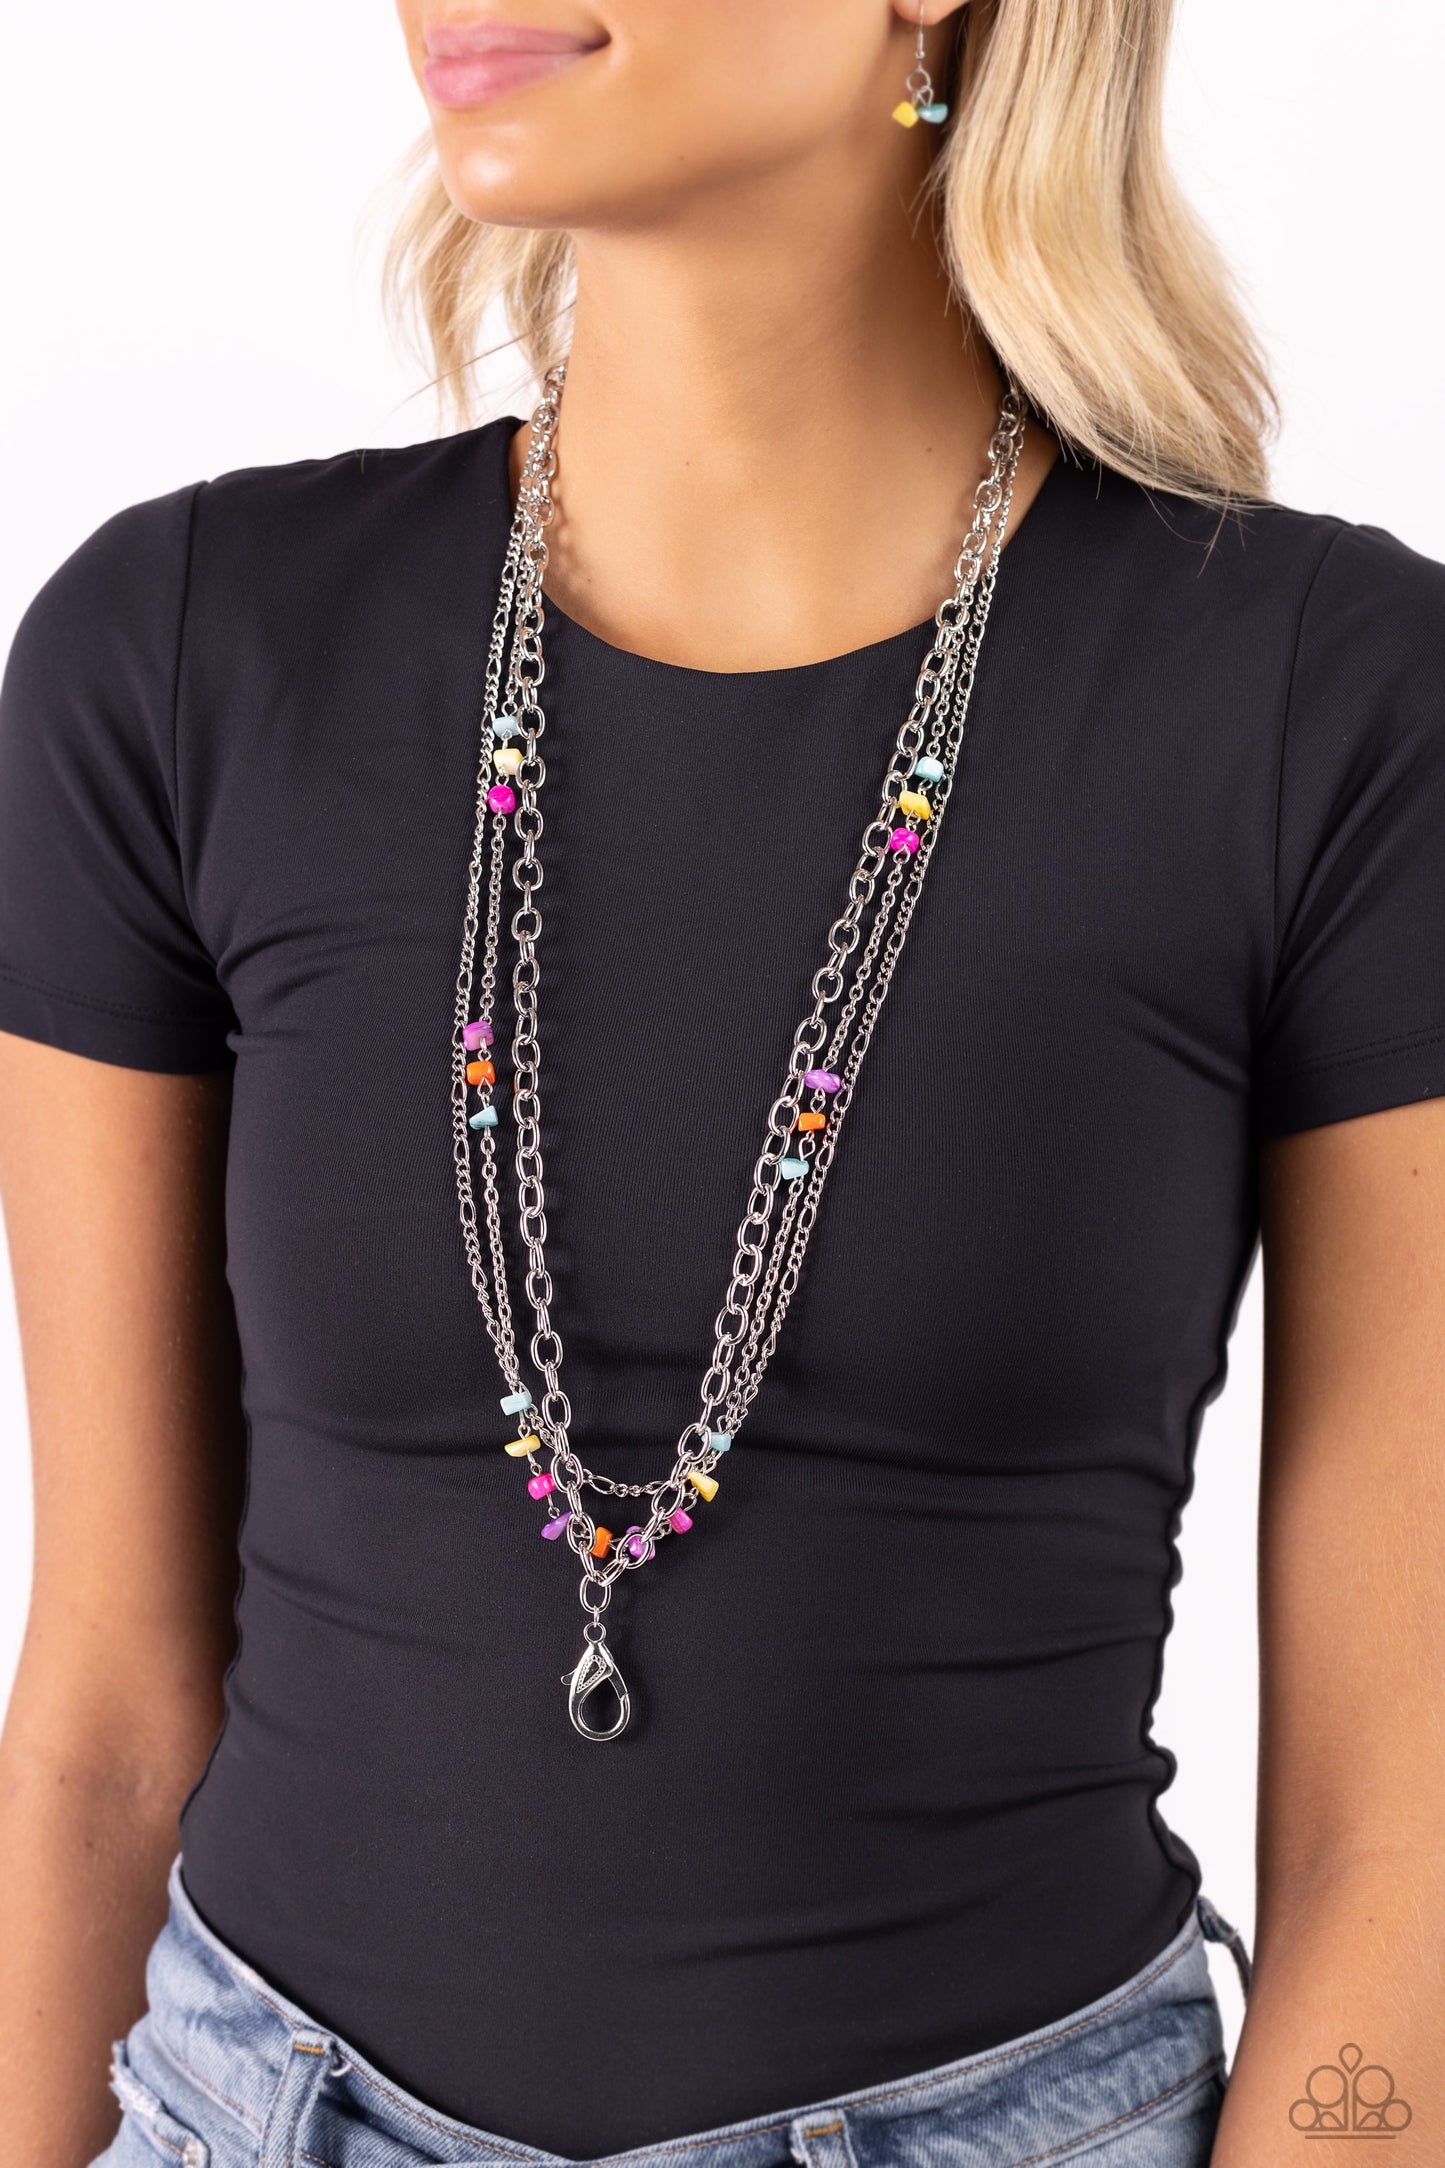 Paparazzi Accessories Seize the Stacks - Multi *Lanyard Featuring refreshing, chiseled turquoise, yellow, hot pink, orange, and purple shell-like beads, mismatched silver chains layer down the chest for a seasonal look. A lobster clasp hangs from the bott